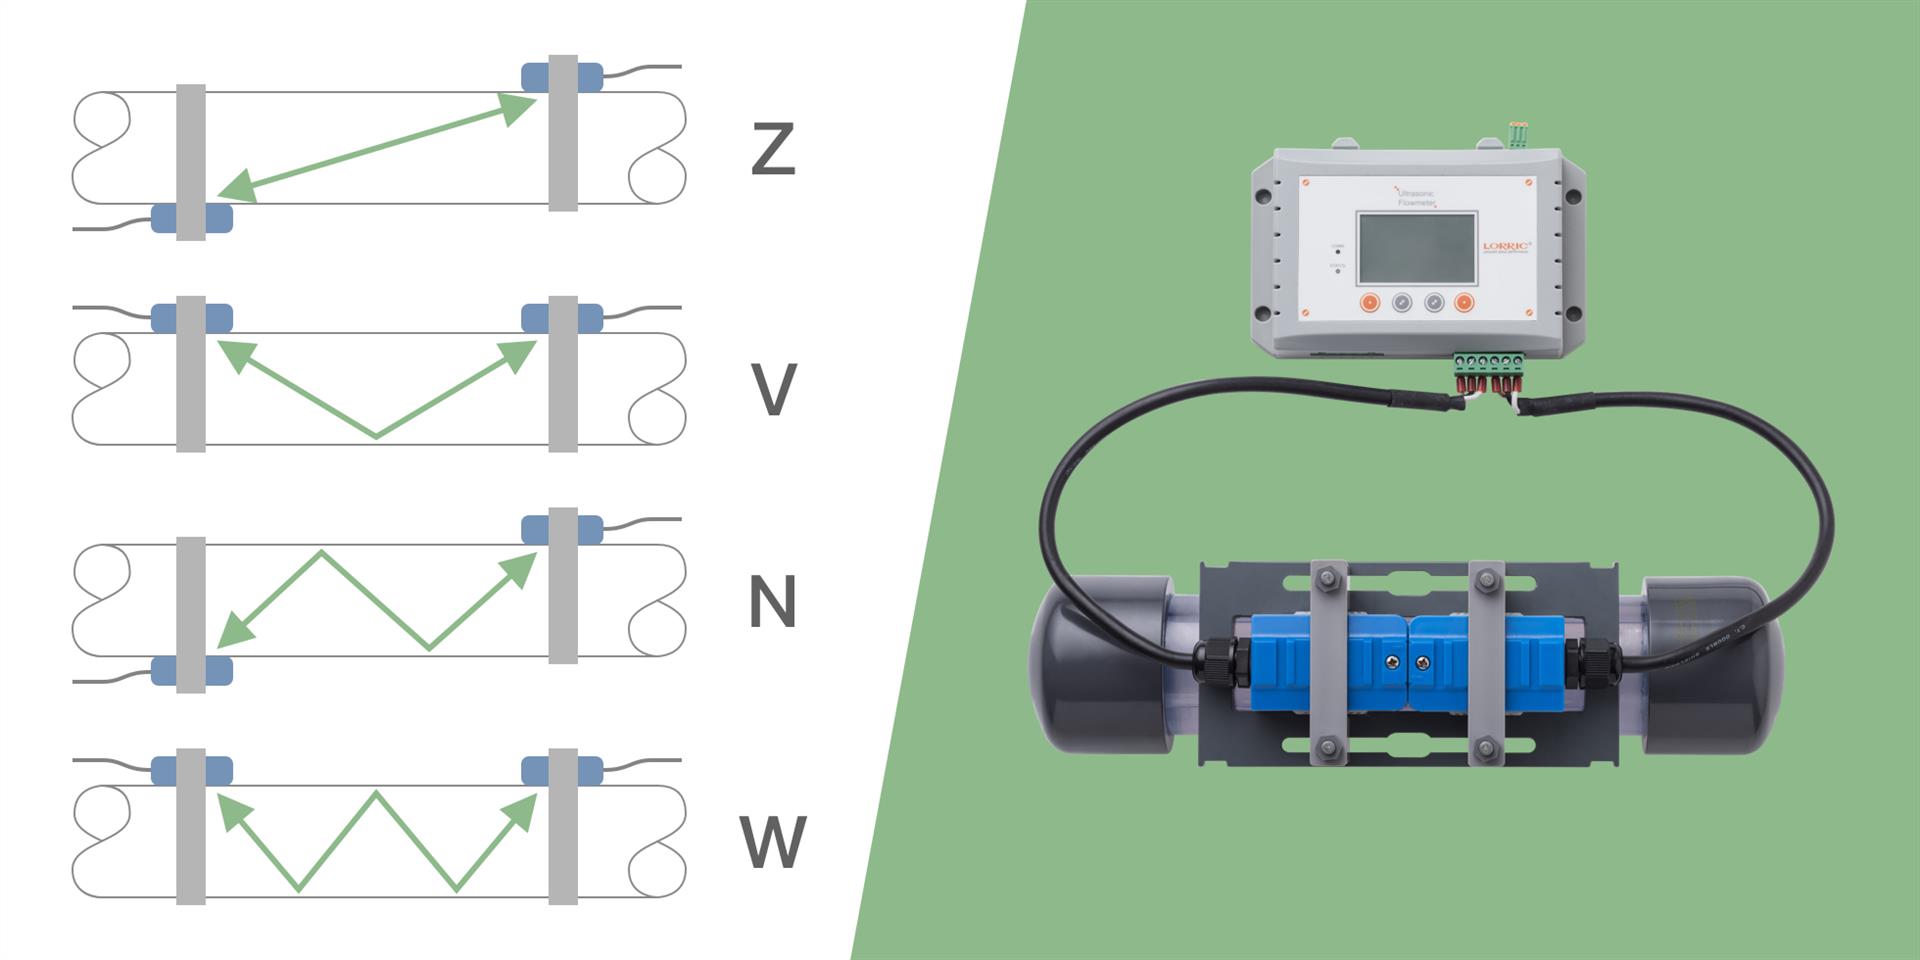 How to Install an Ultrasonic Flow Meter? - Deciding Between Z, V, N, or W Methods for Probe Installation